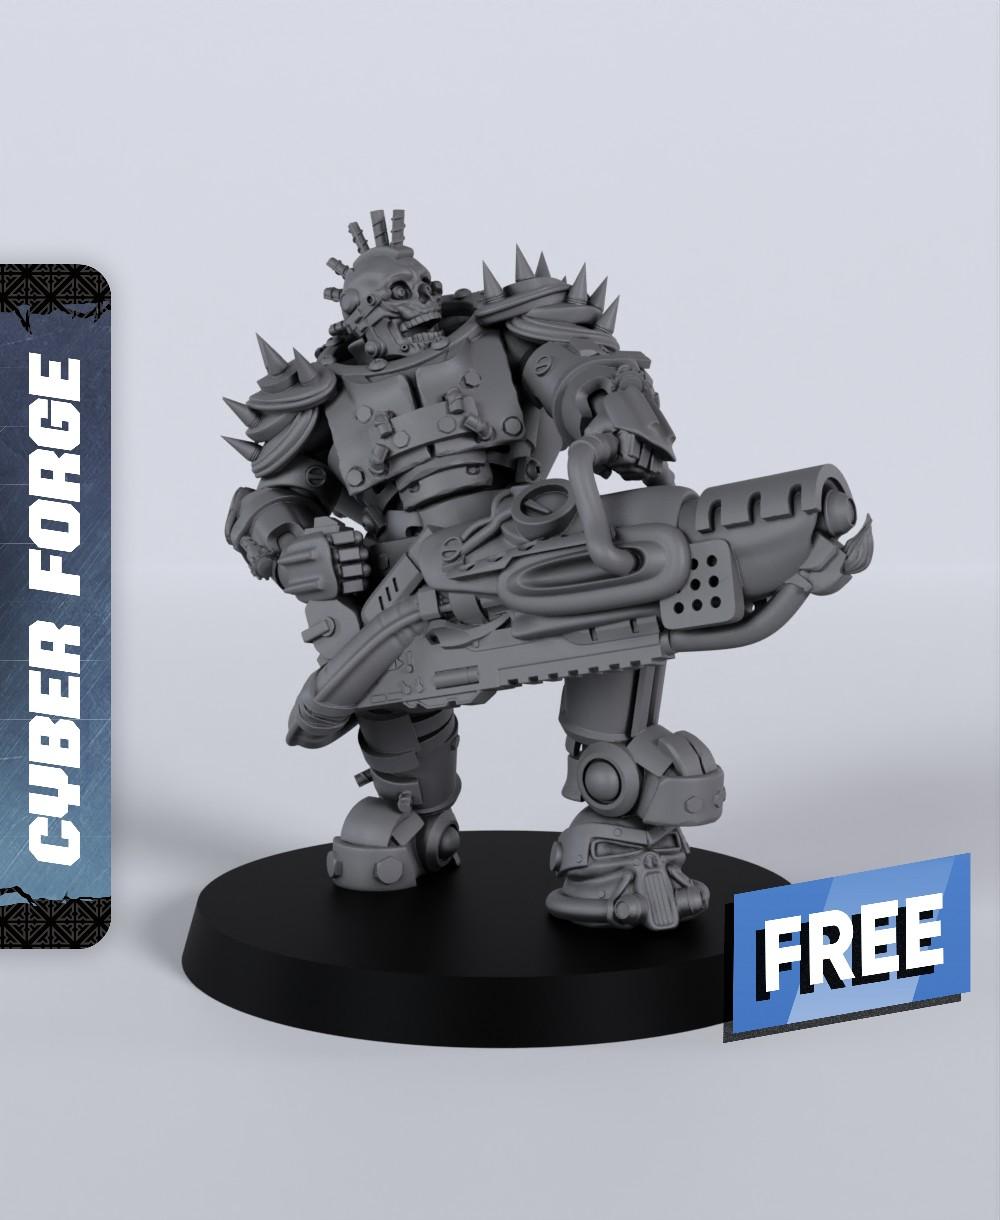 Flameoner - With Free Cyberpunk Dragon Warhammer - 40k Sci-Fi Gift Ideas for RPG and Wargamers 3d model